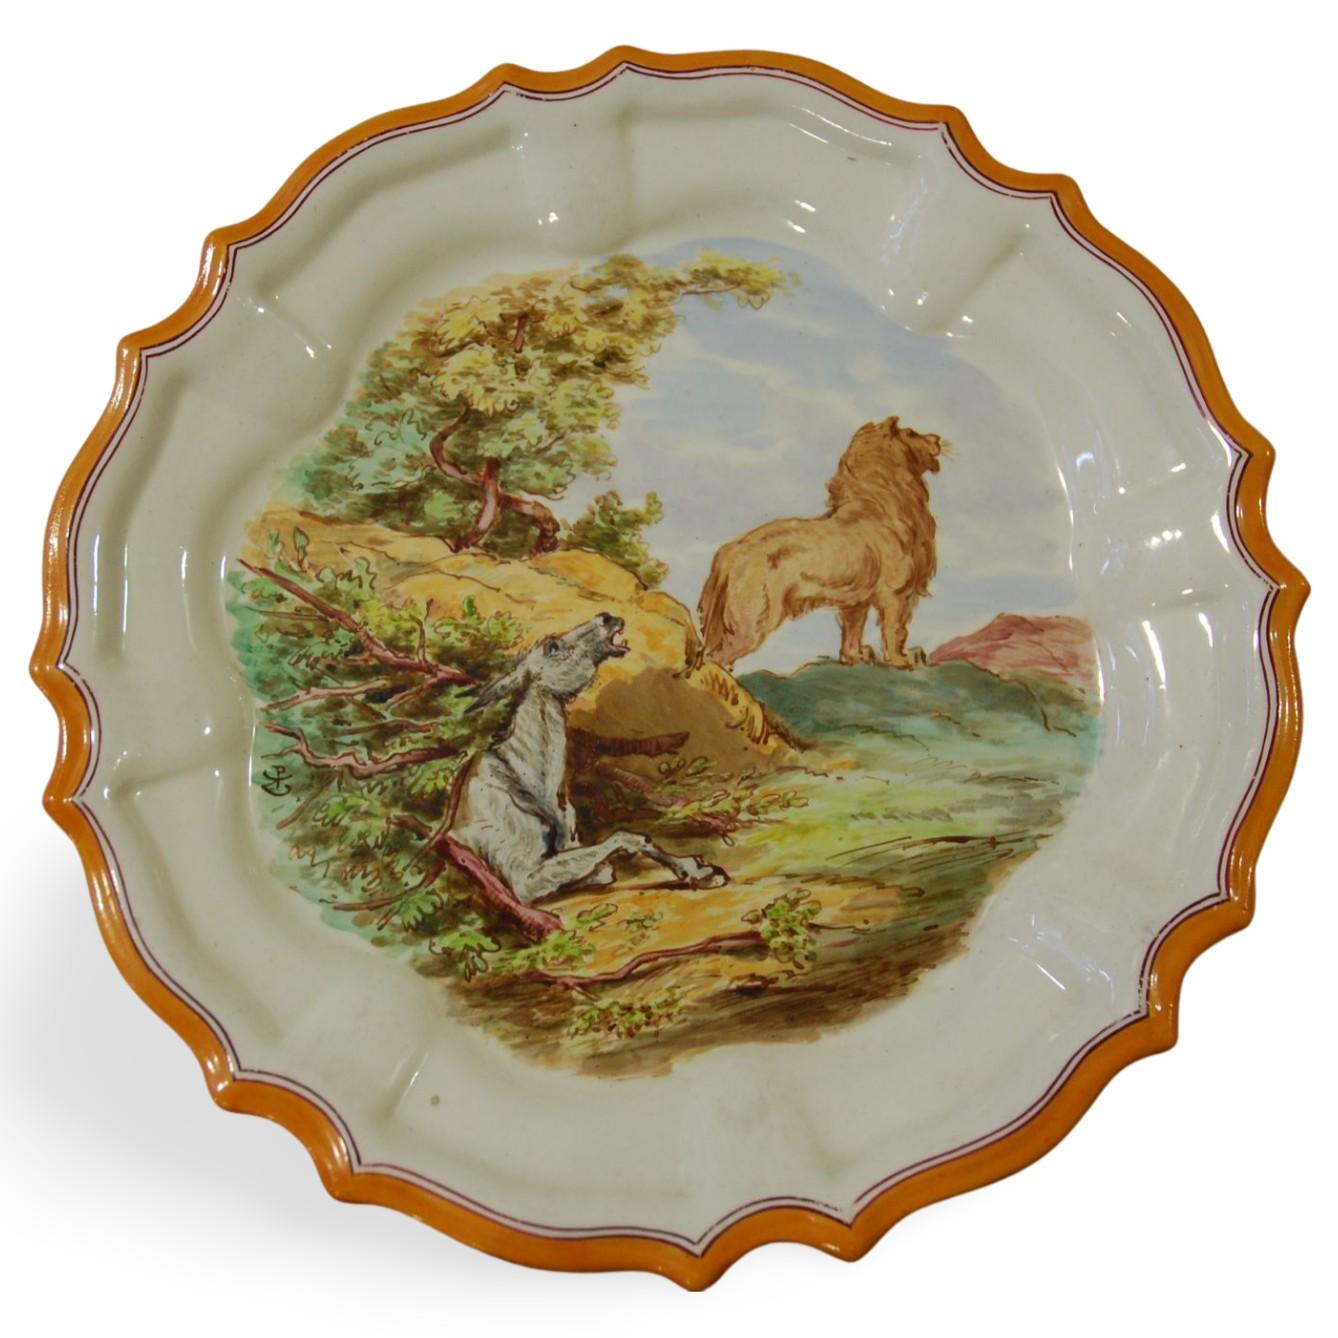 Set of 12 Plates, Aesop Fables, Wedgwood, circa 1860 For Sale 6